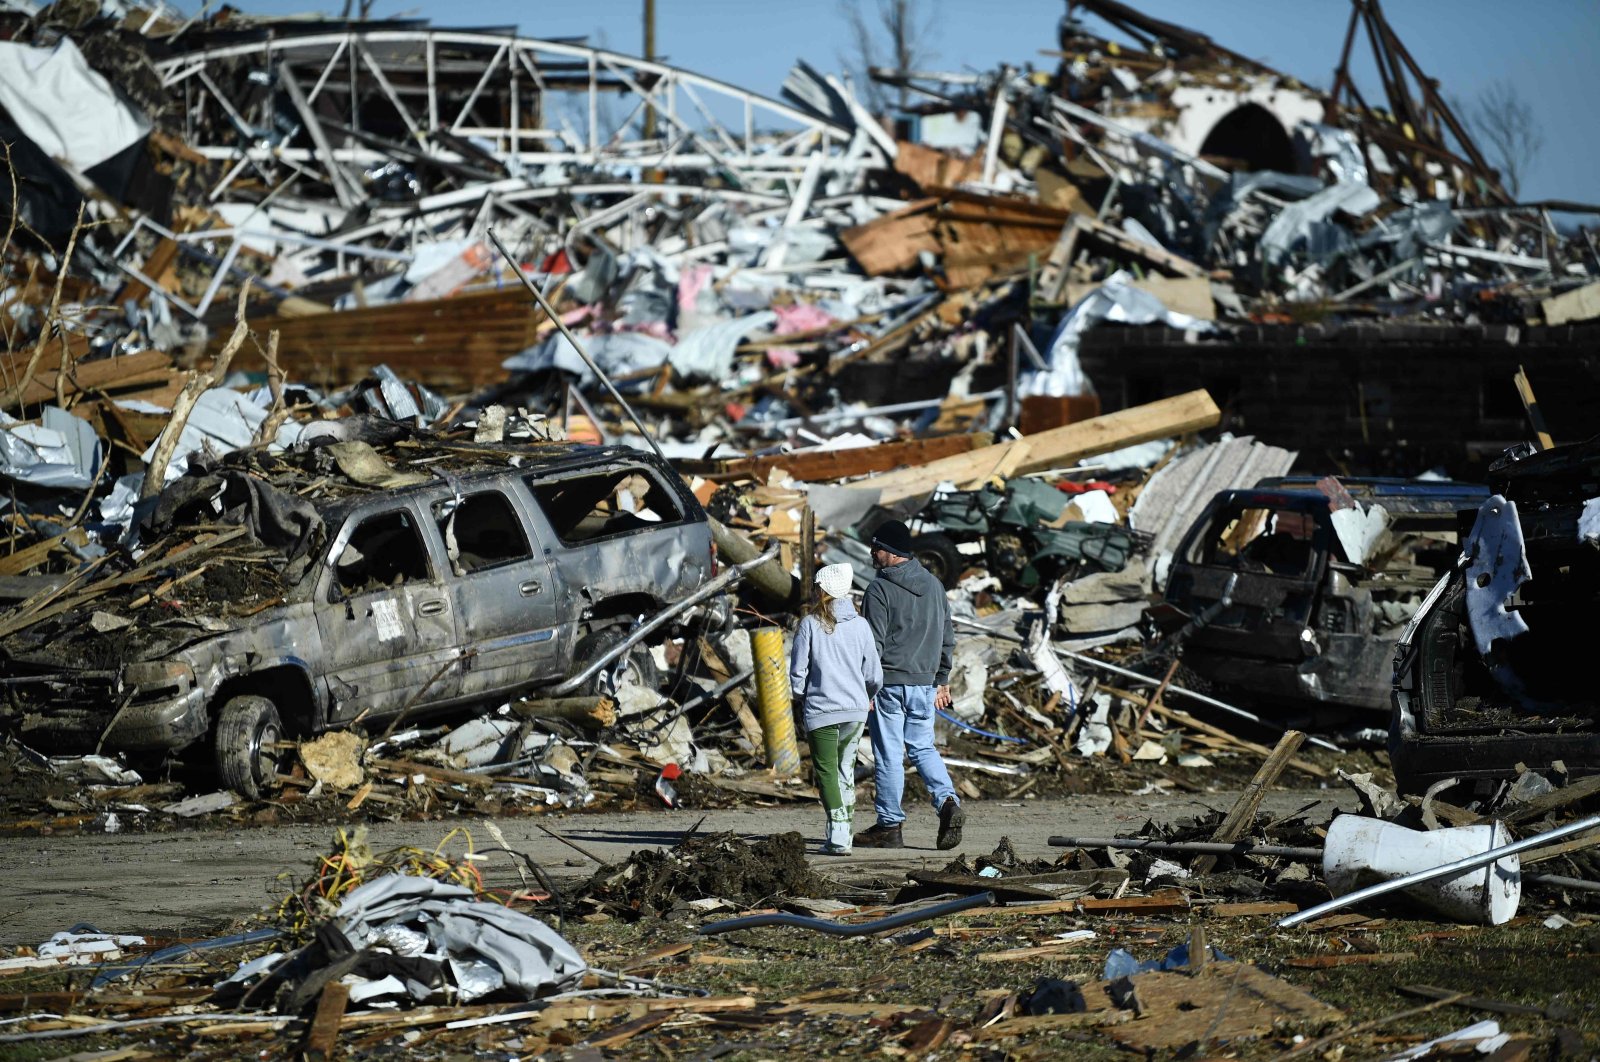 Tornado damage is seen after extreme weather hit the region, Mayfield, Kentucky, U.S., Dec. 12, 2021. (AFP Photo)